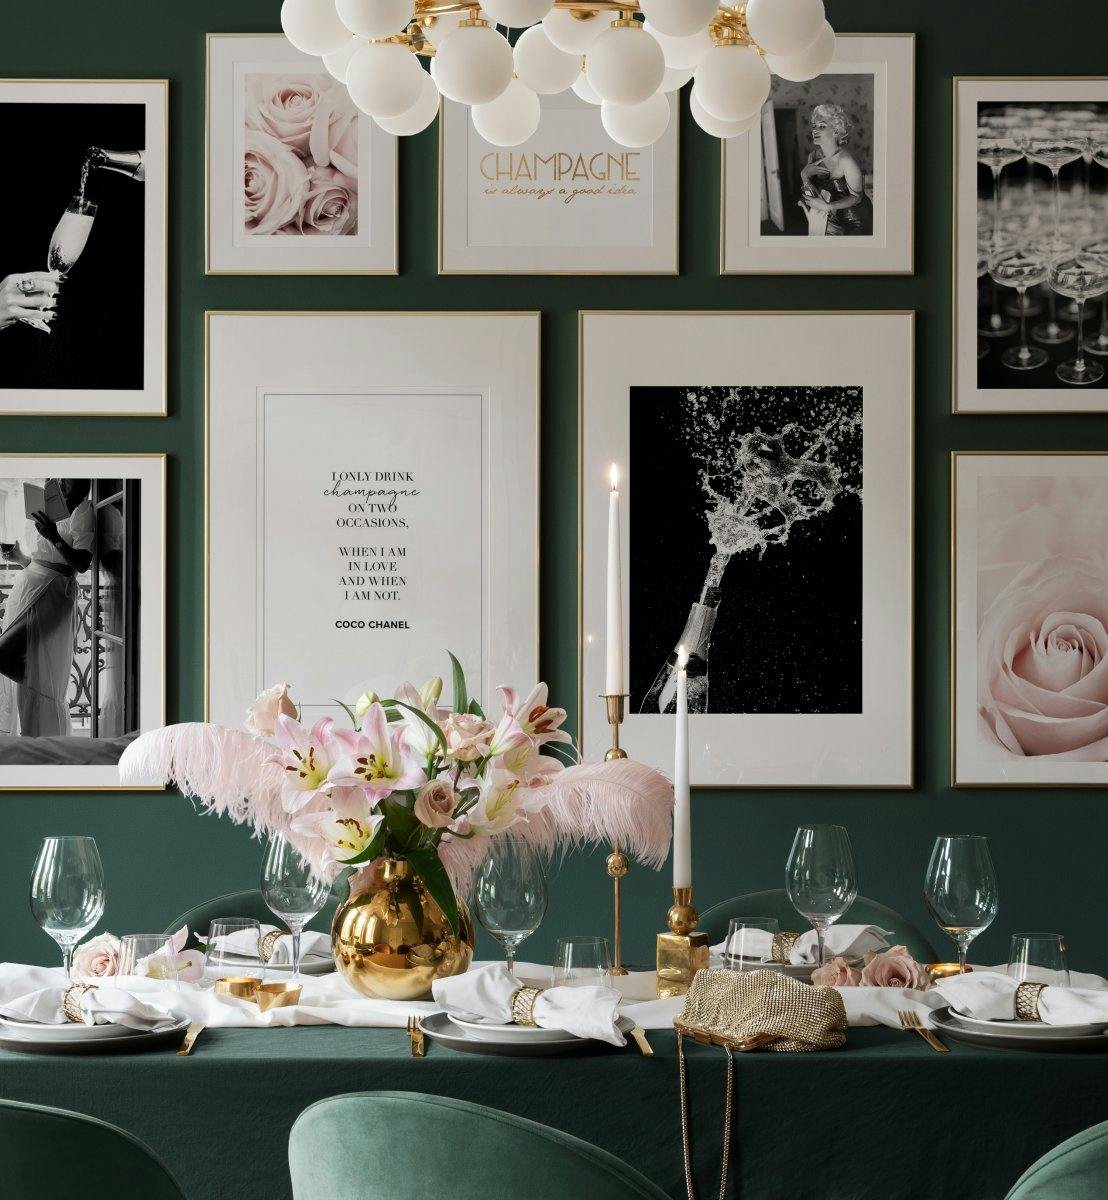 Photographs in black and white for the dining room